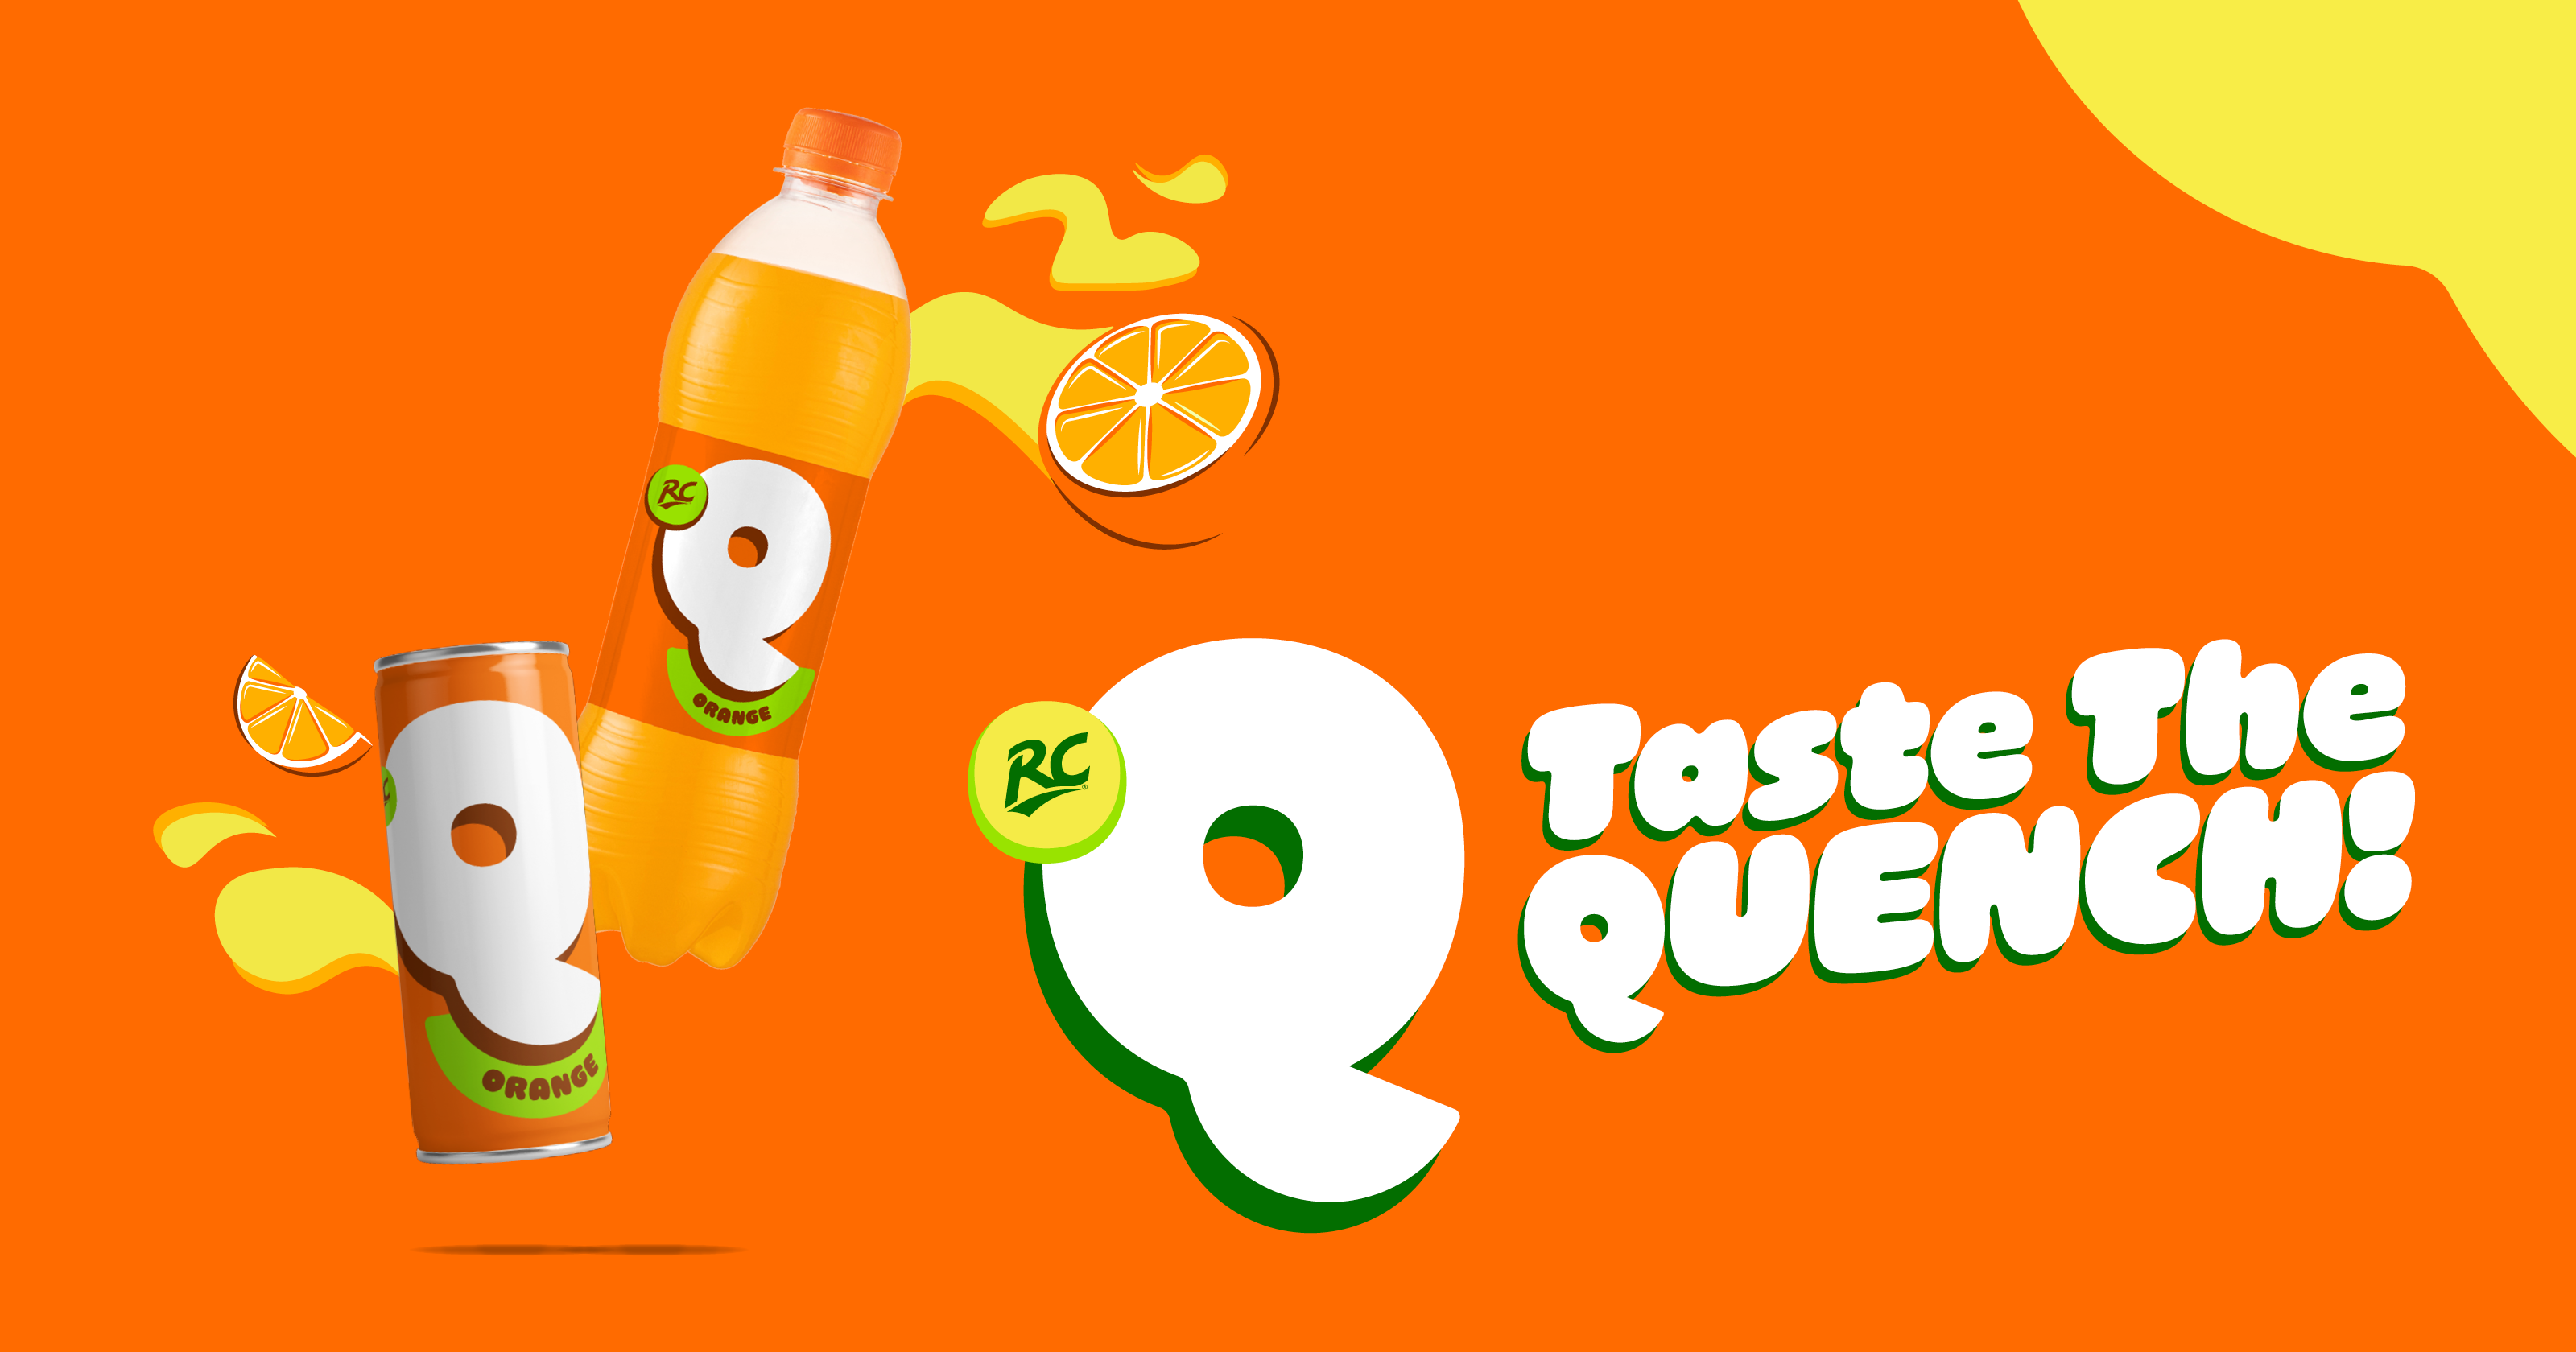 Taste the quench with the new RC Q